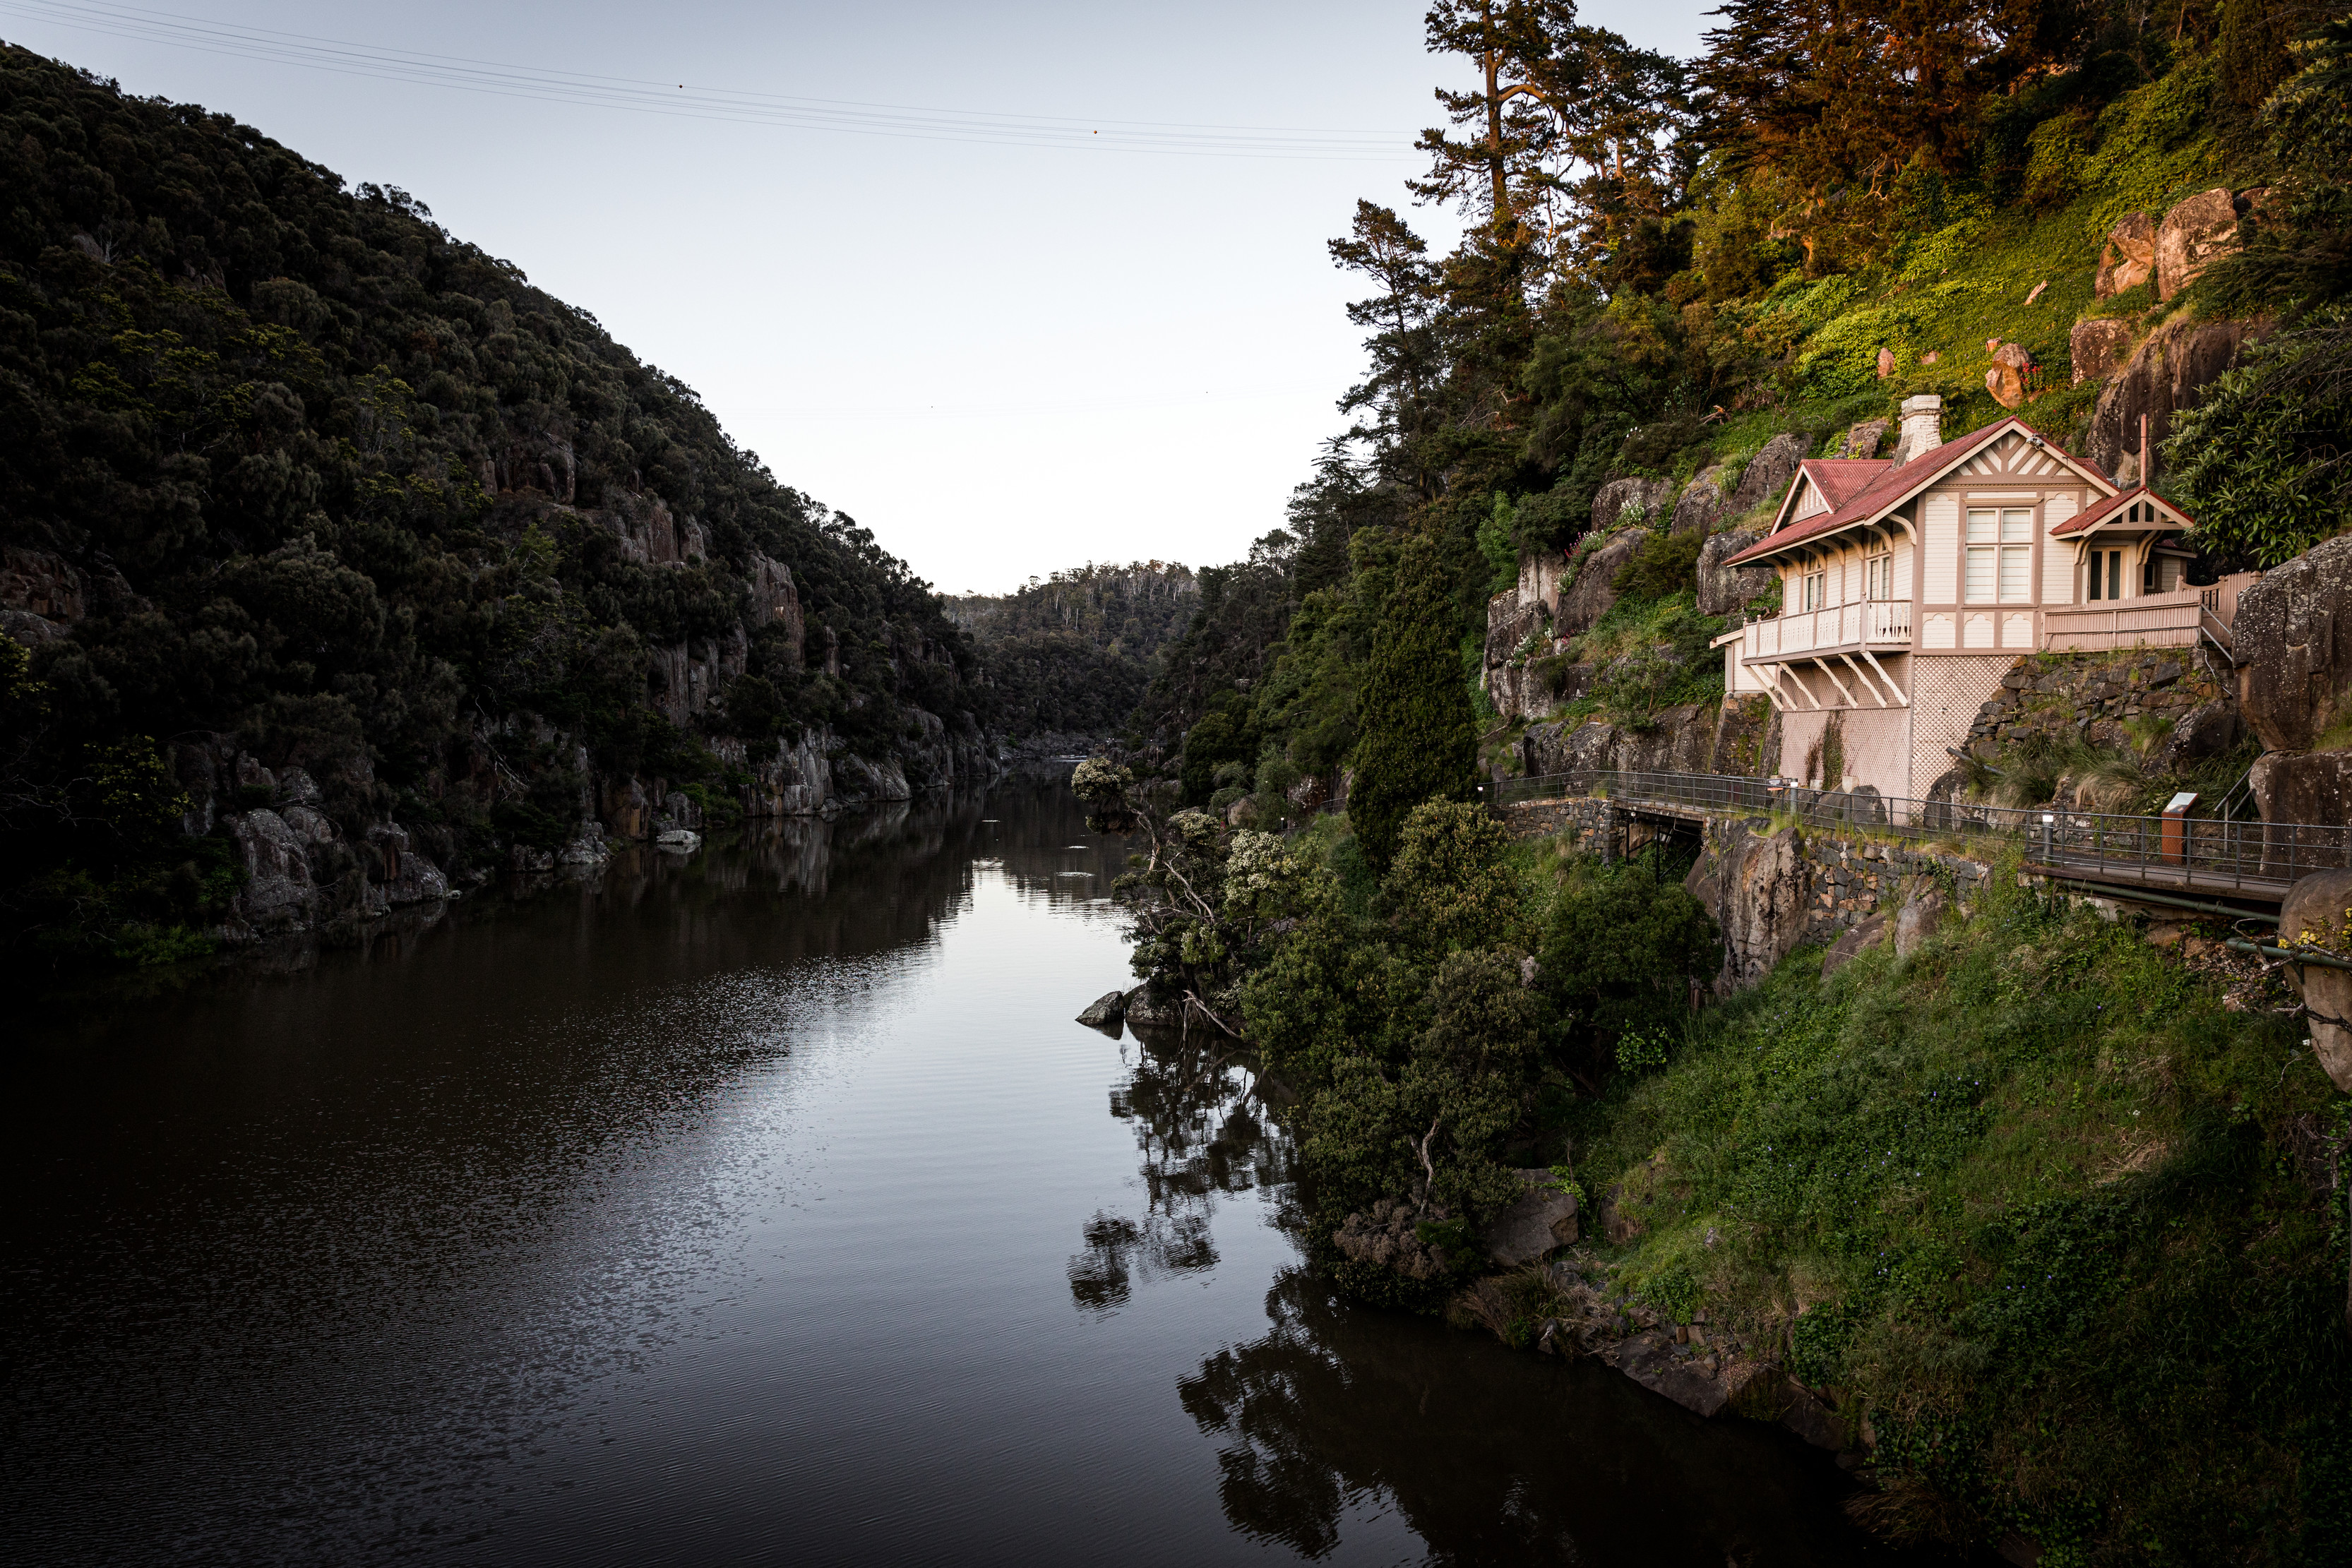 Looking down the gorge at Launceston Cataract Gorge & First Basin.